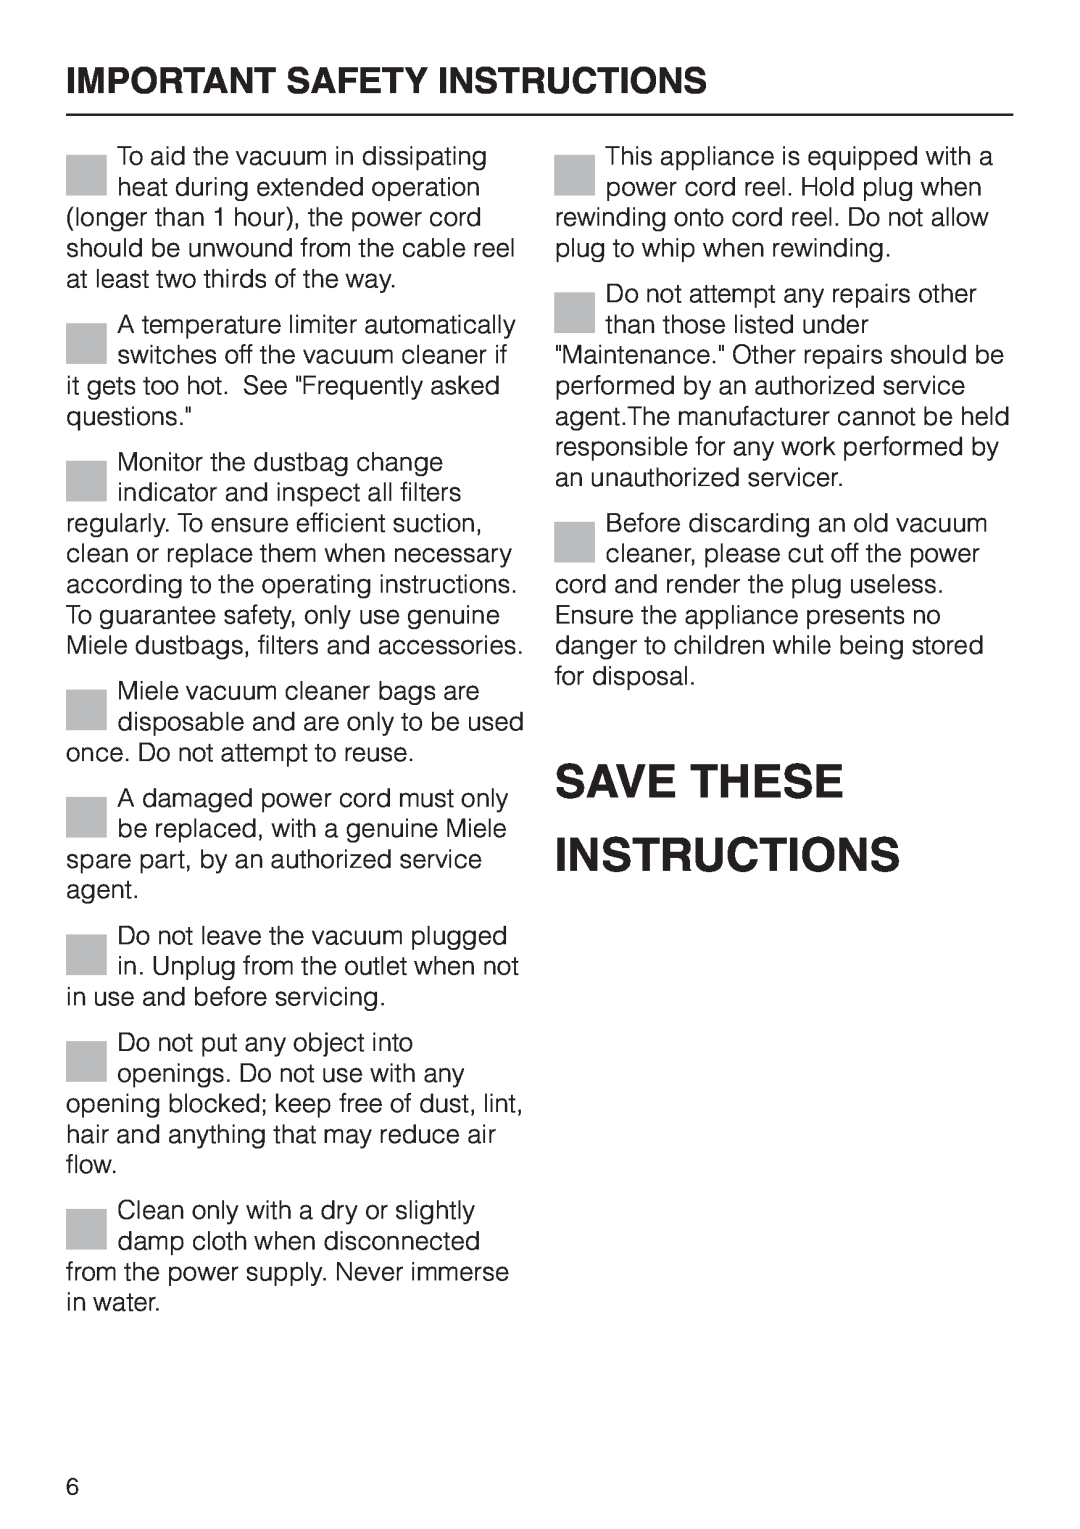 Miele HS09 operating instructions Save These Instructions, Important Safety Instructions 